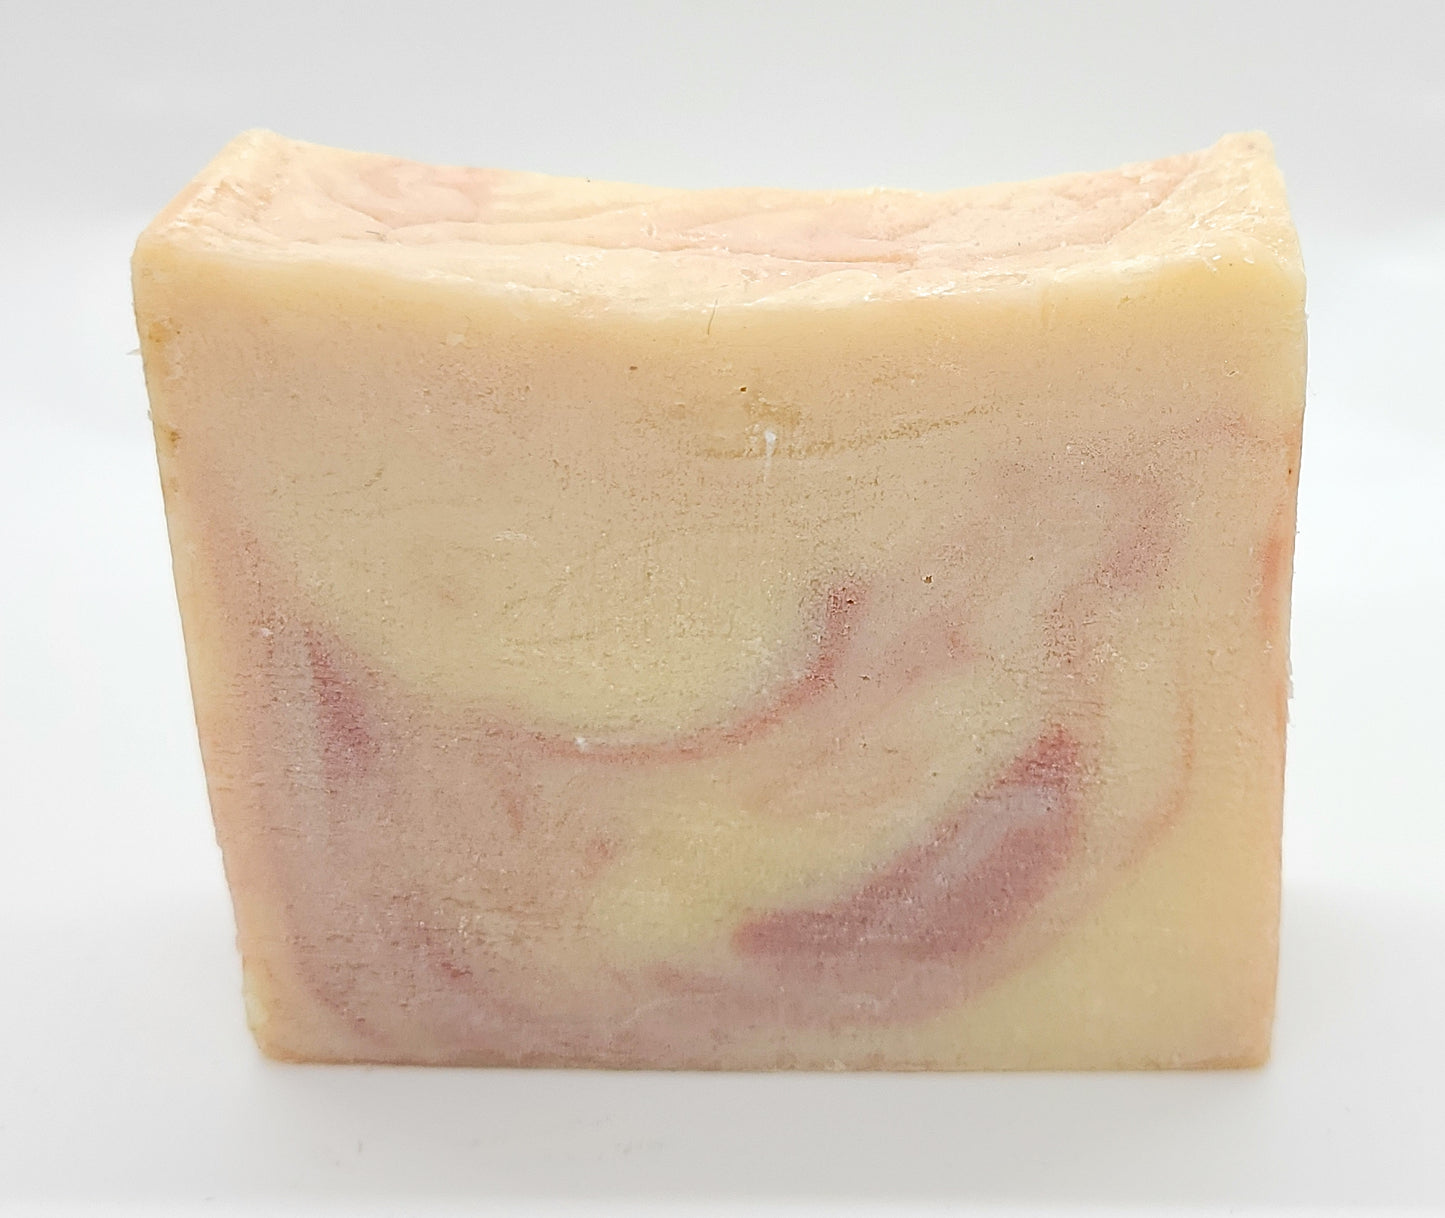 Natural conditioning shampoo soap bar for dry hair